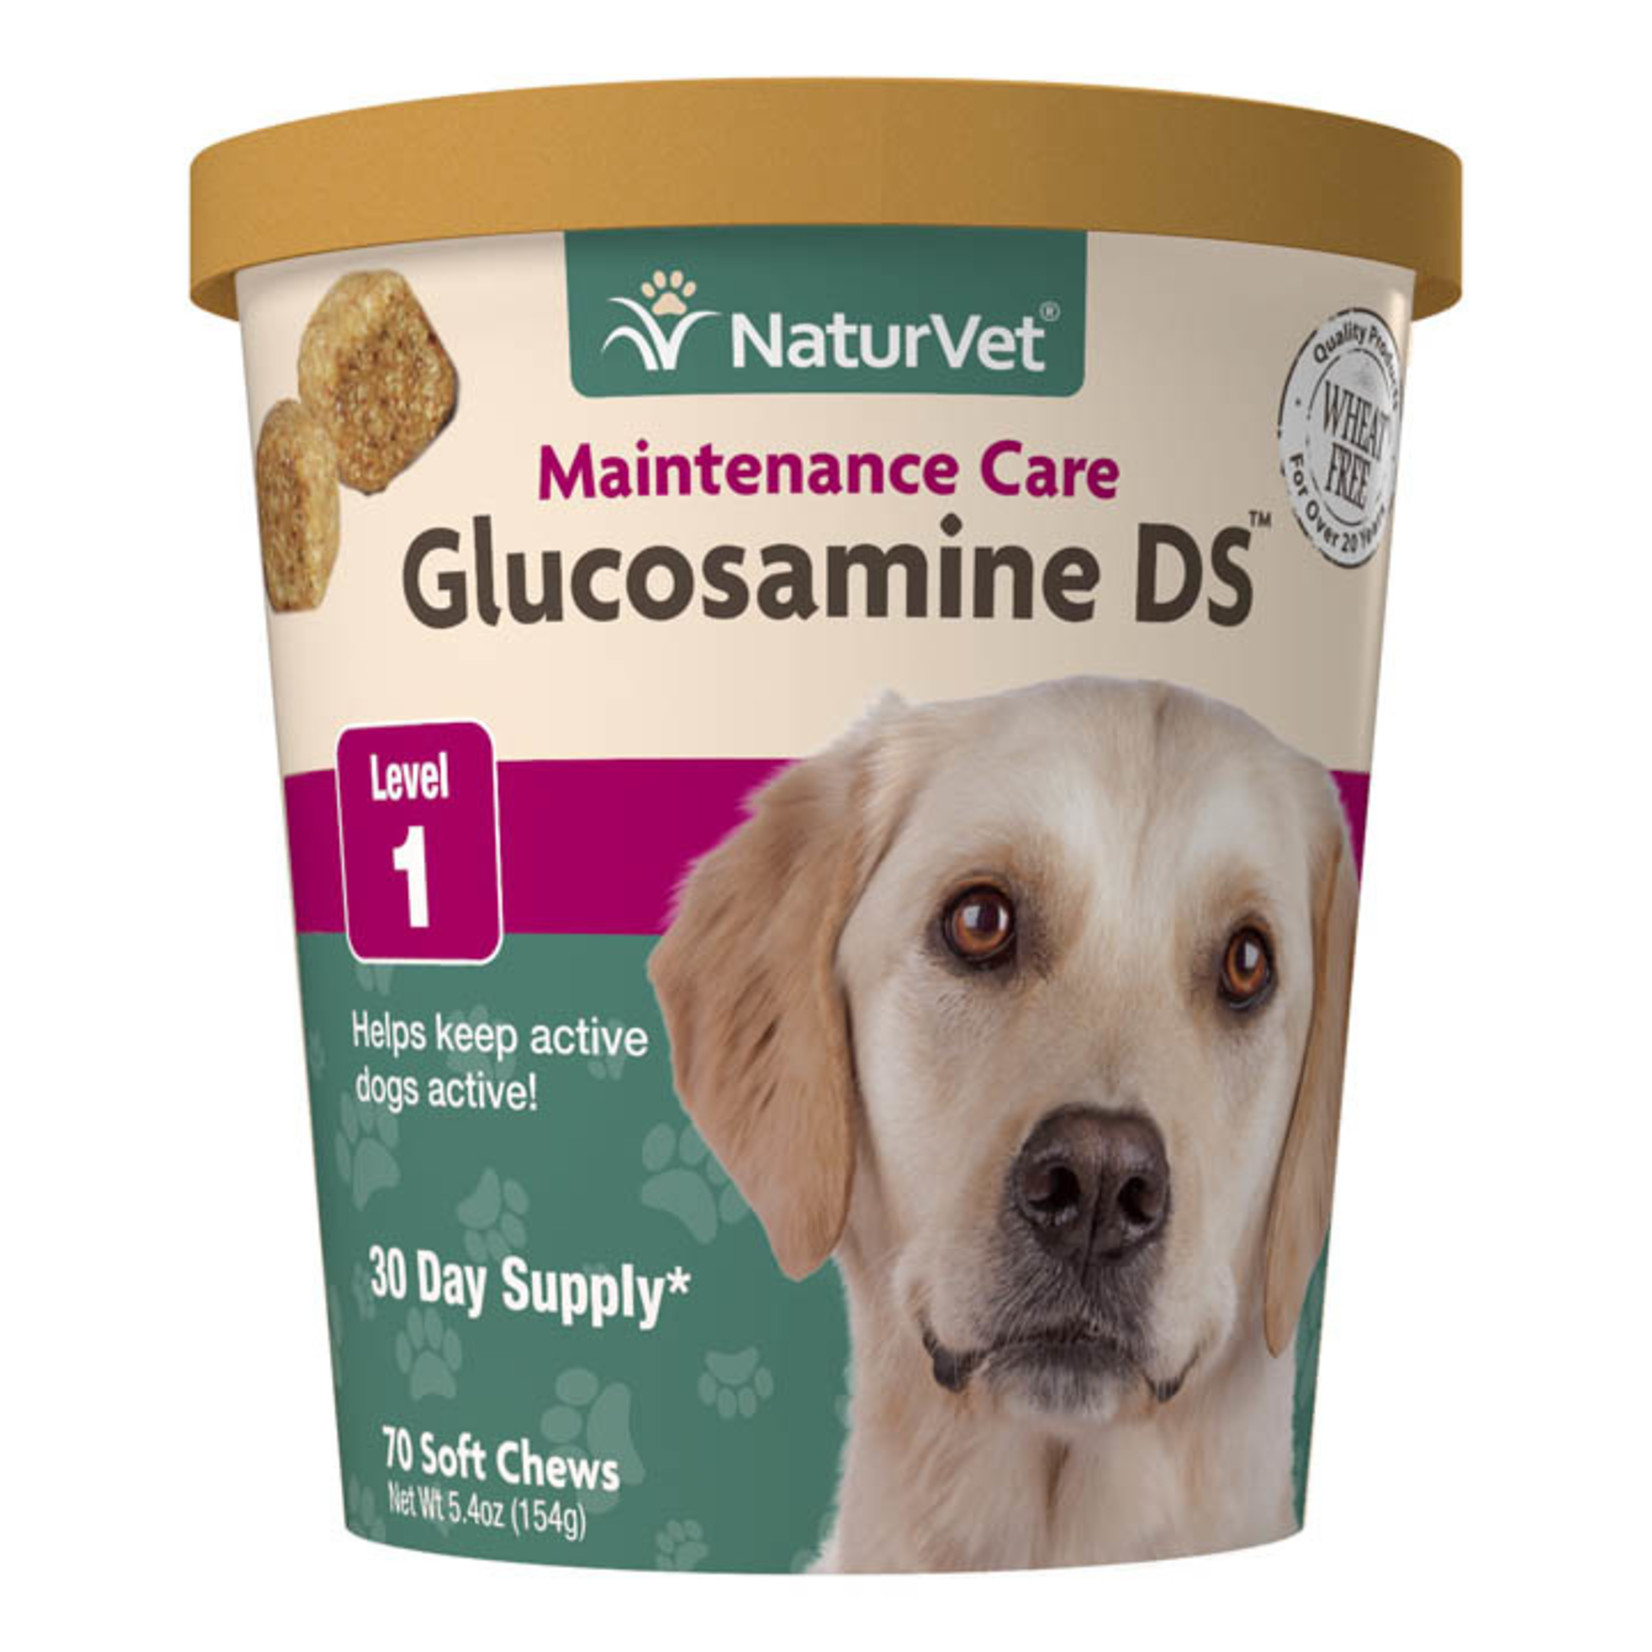 naturVet NaturVet Glucosamine DS Maintenance Care Level 1 Joint Health Chew for Dogs and Cats 70ct